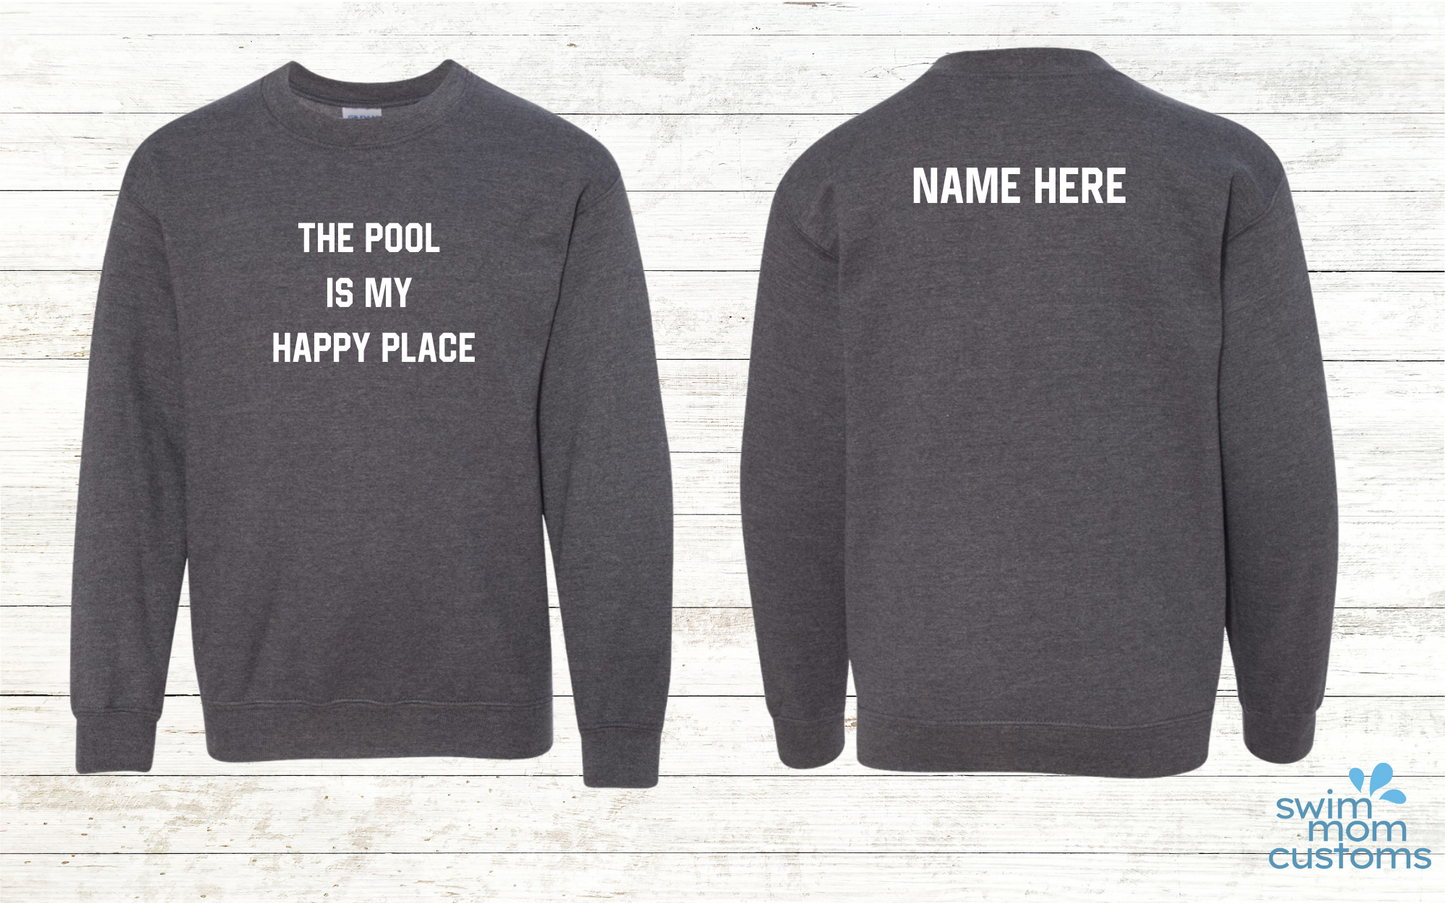 The pool is my happy place - Back of Sweatshirt Personalization Option: Youth Sweatshirt